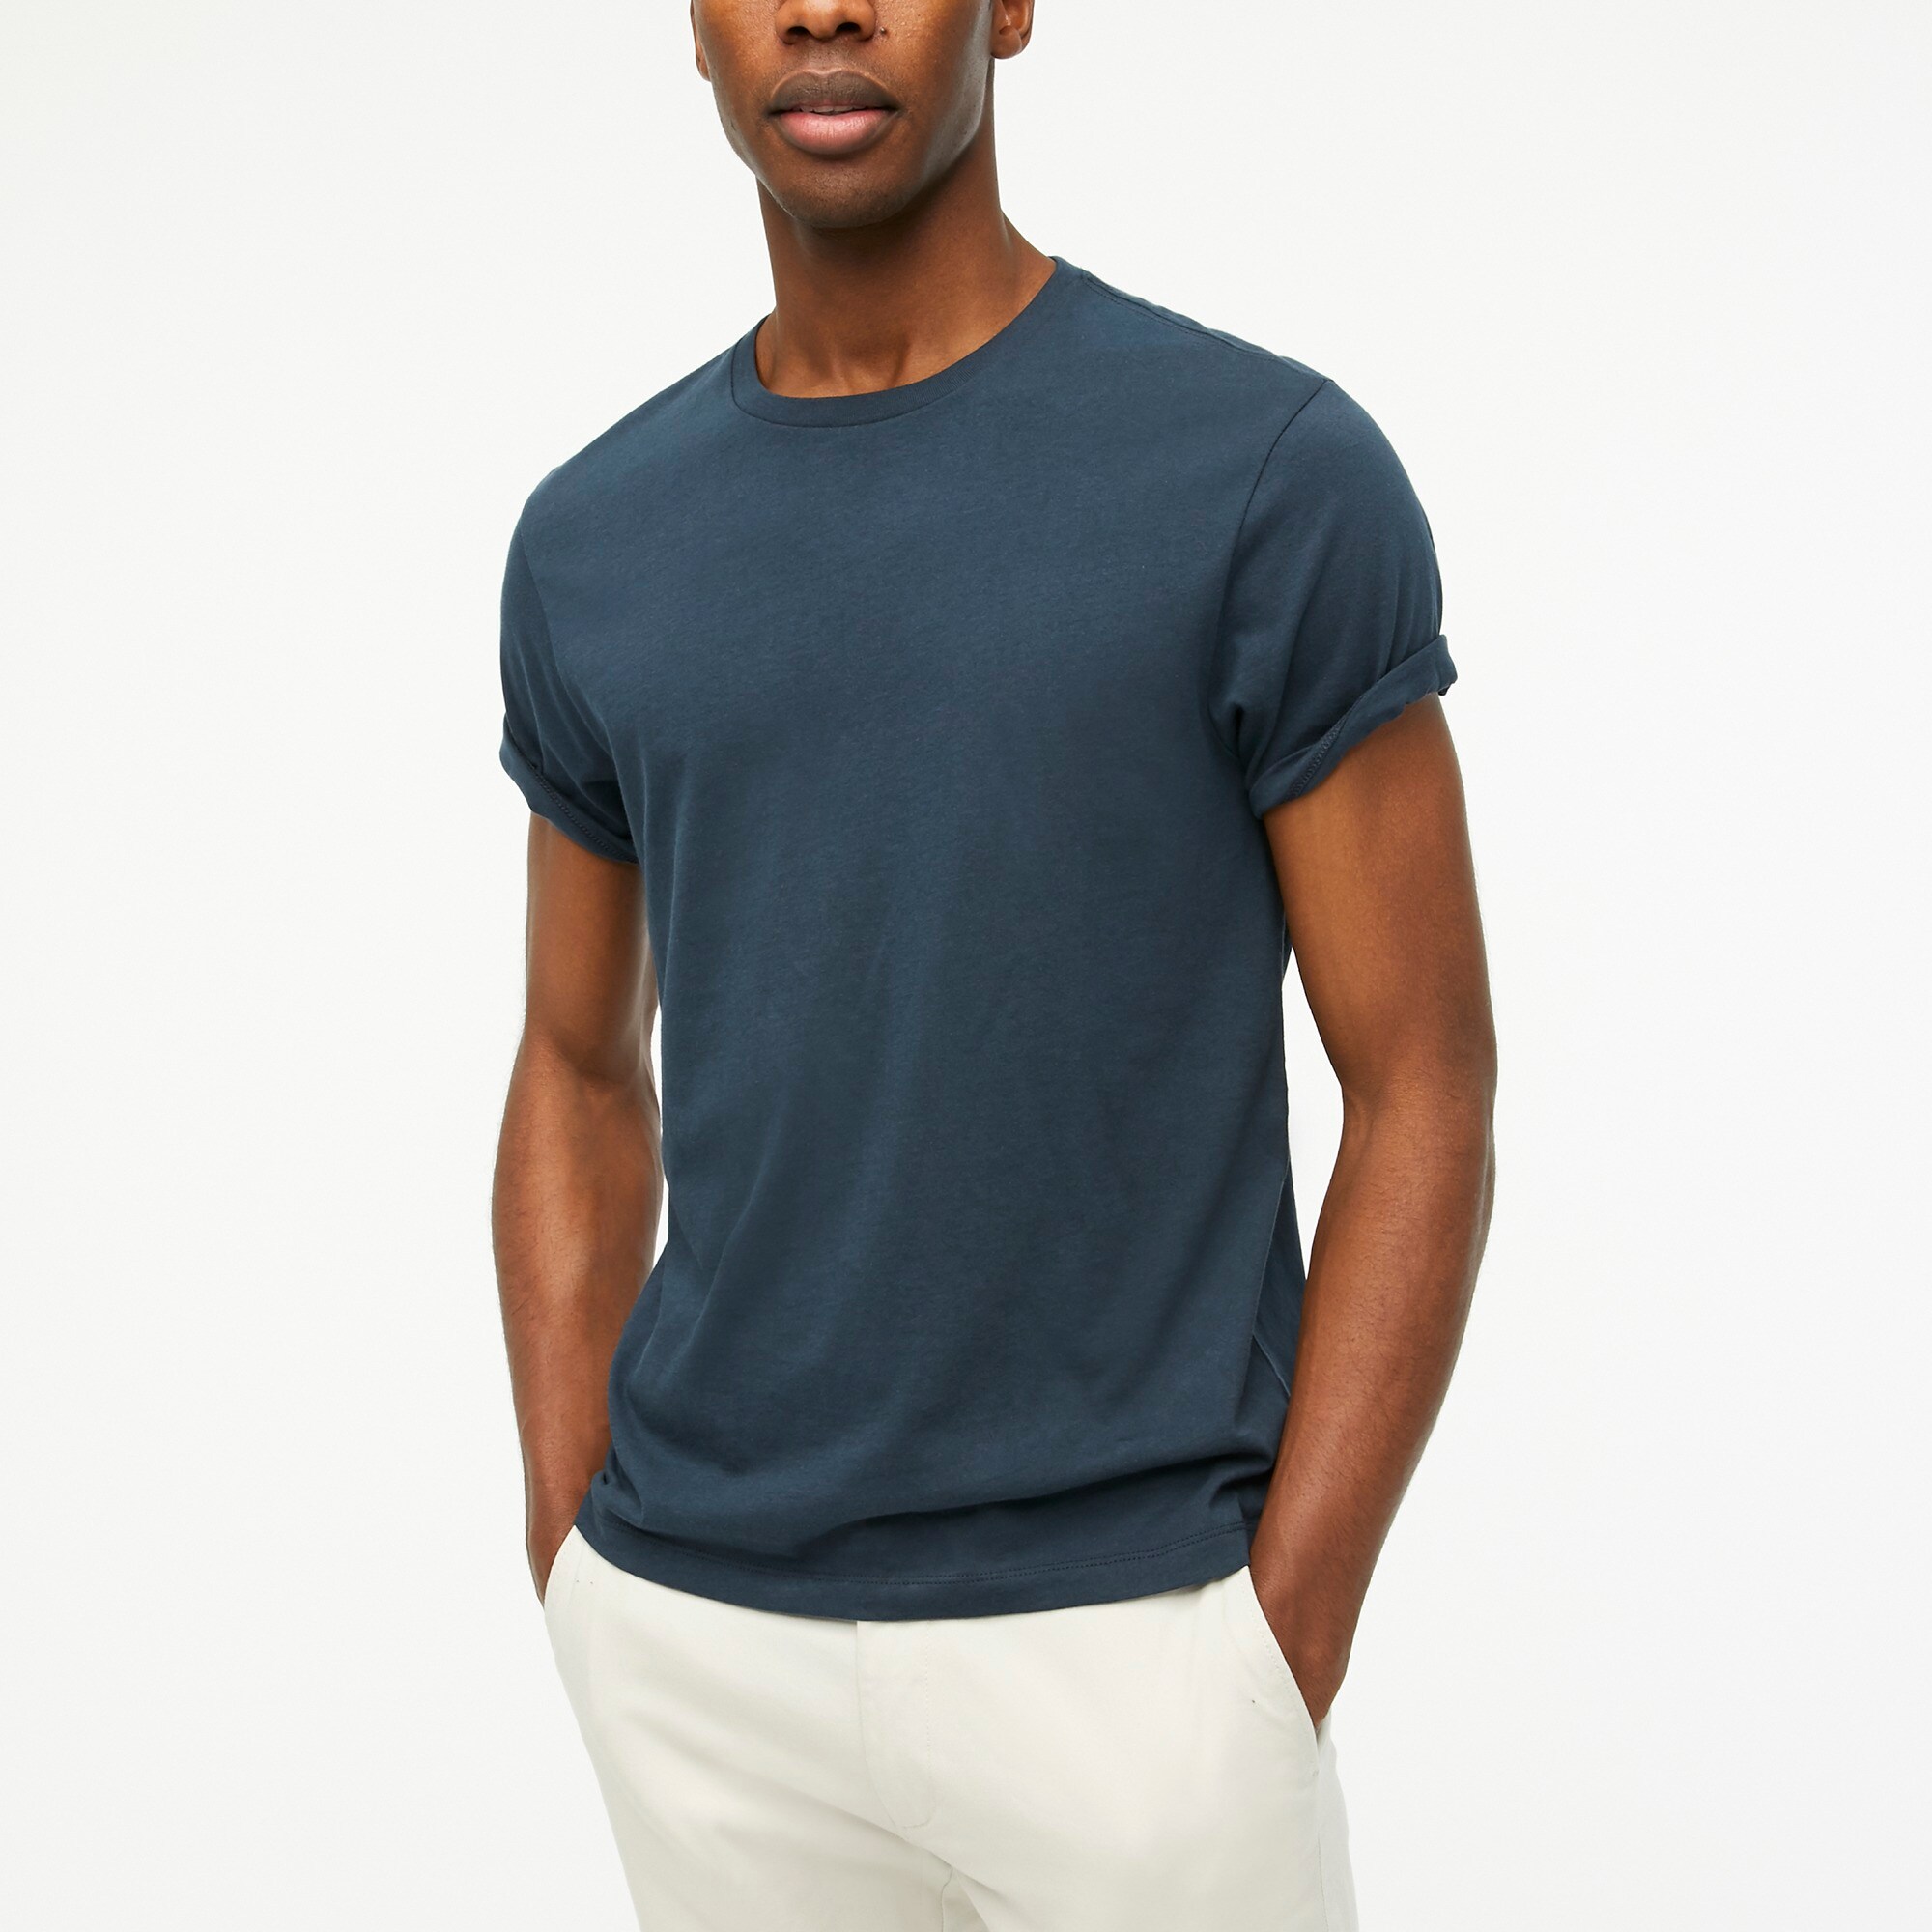 mens Tall washed jersey tee